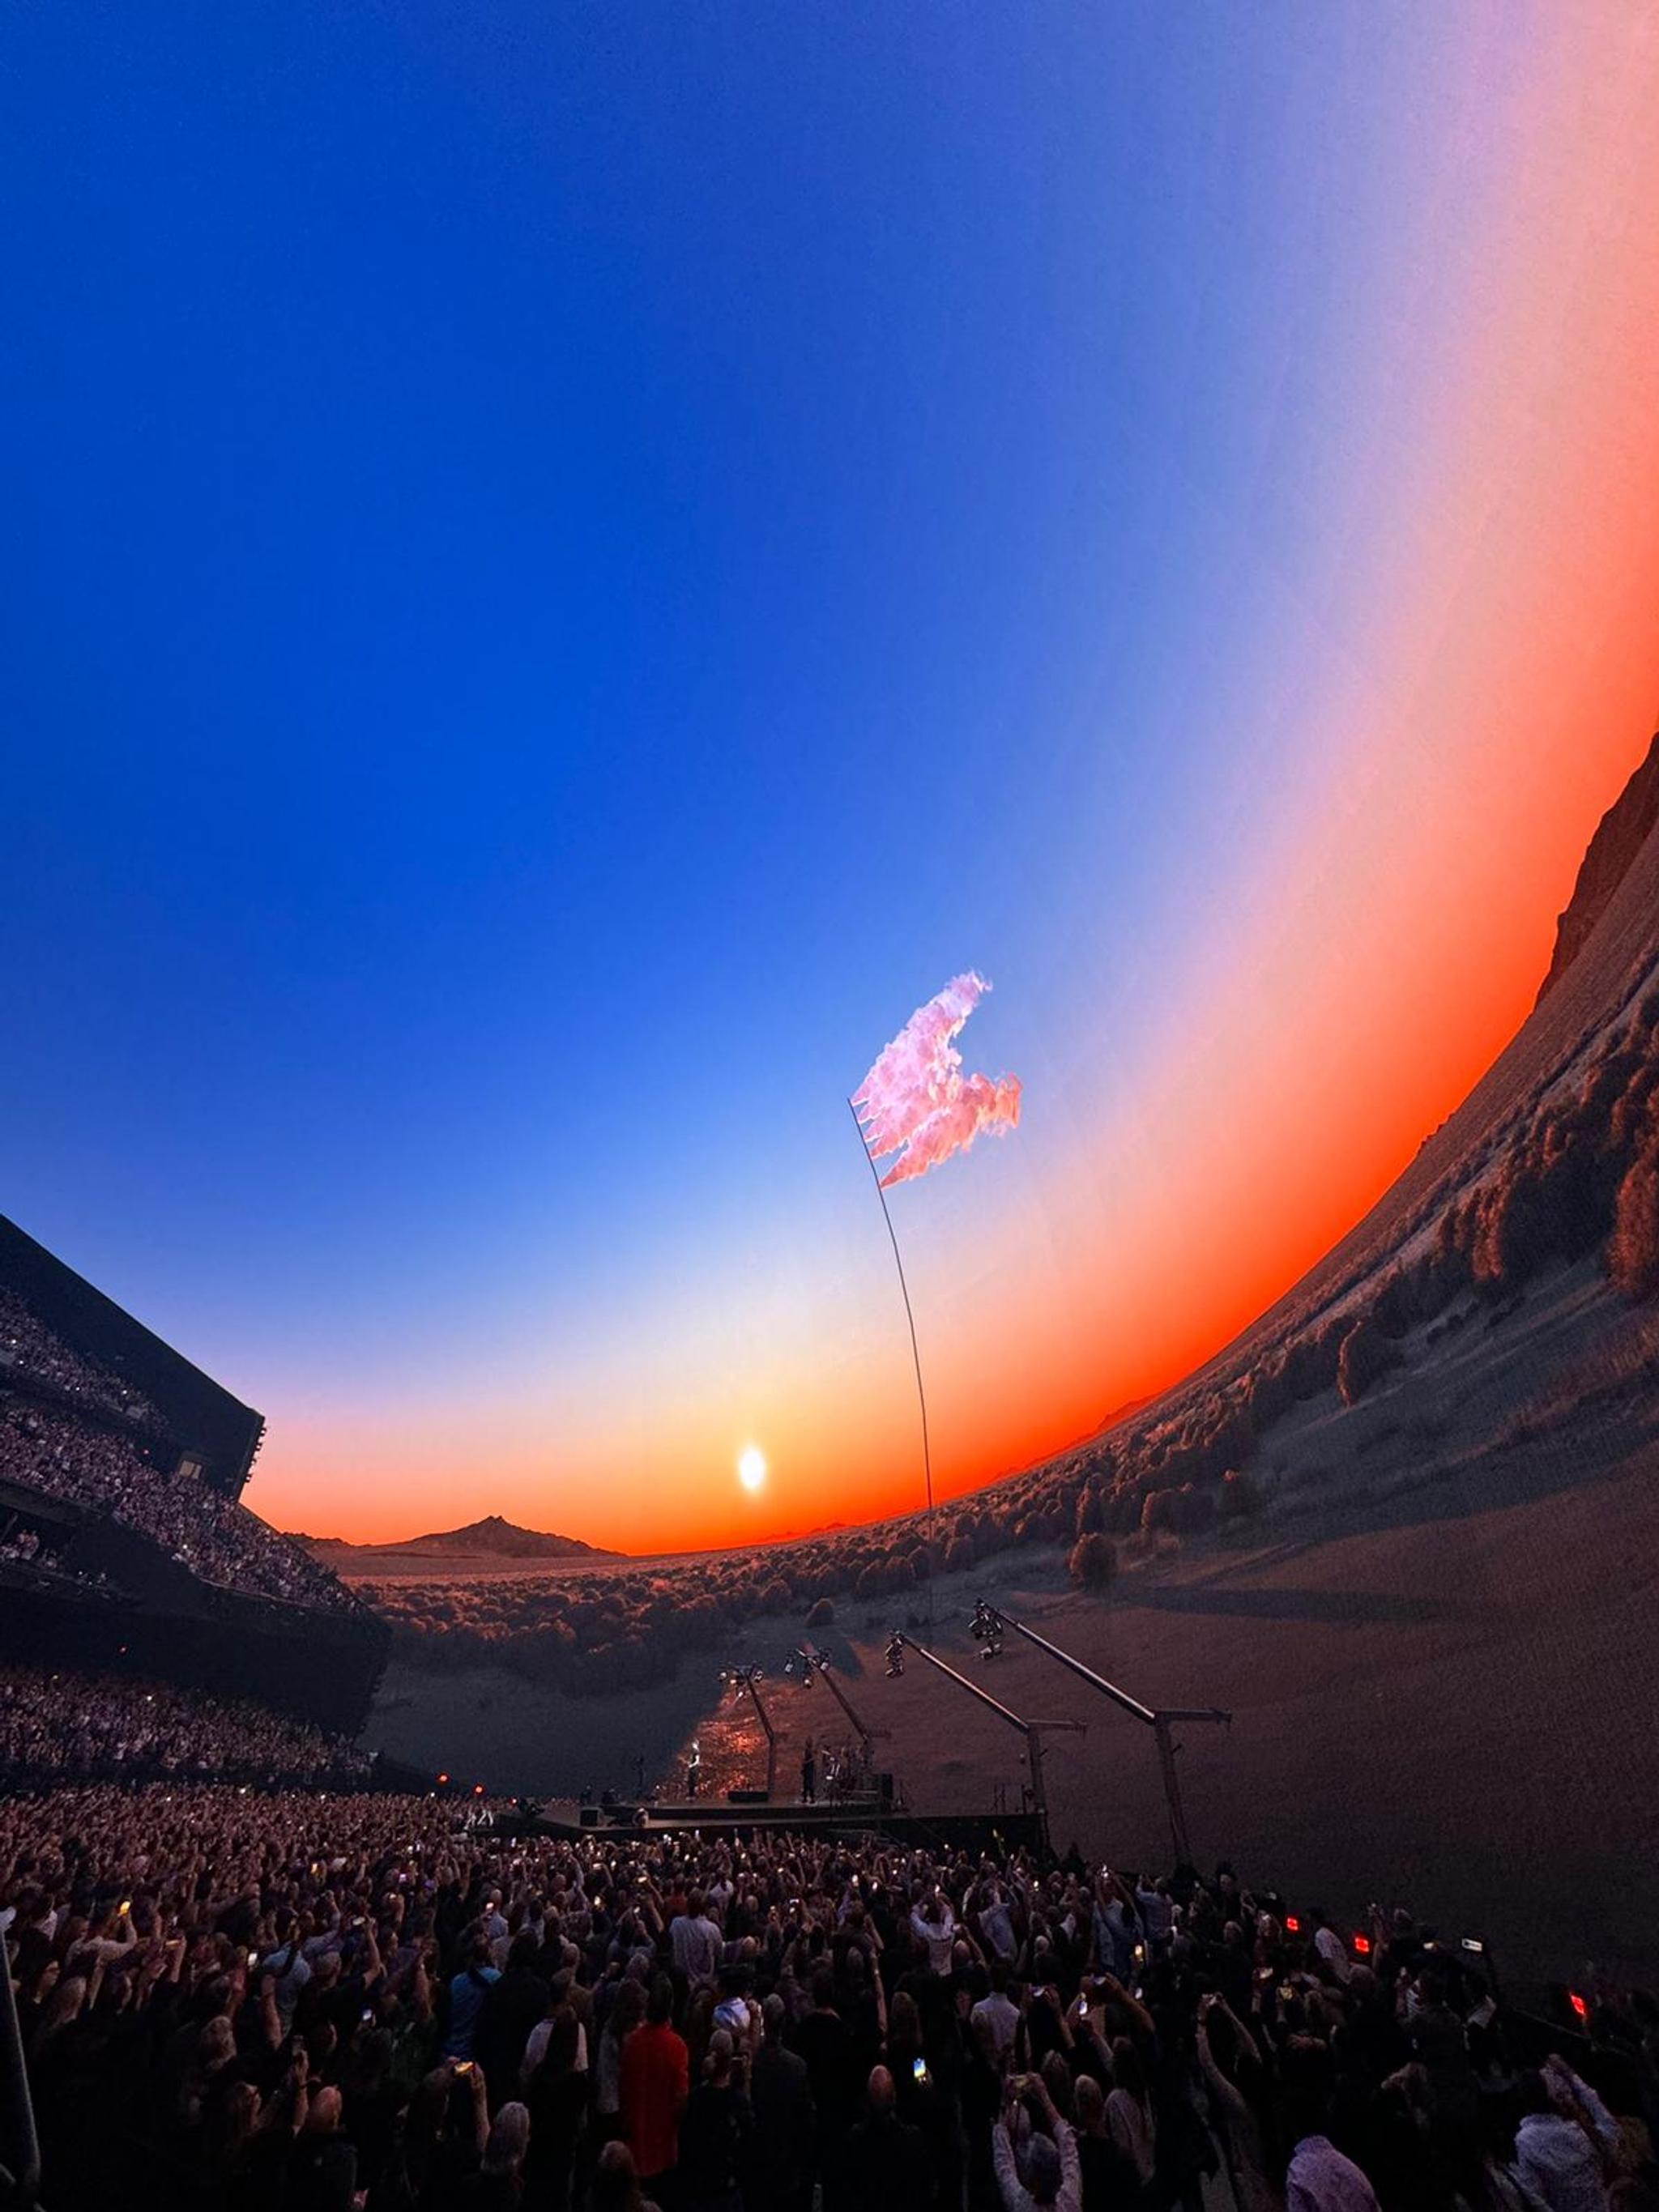 The interior of the U2Dome shows viewers a virtual desert landscape with a sunset in the sky